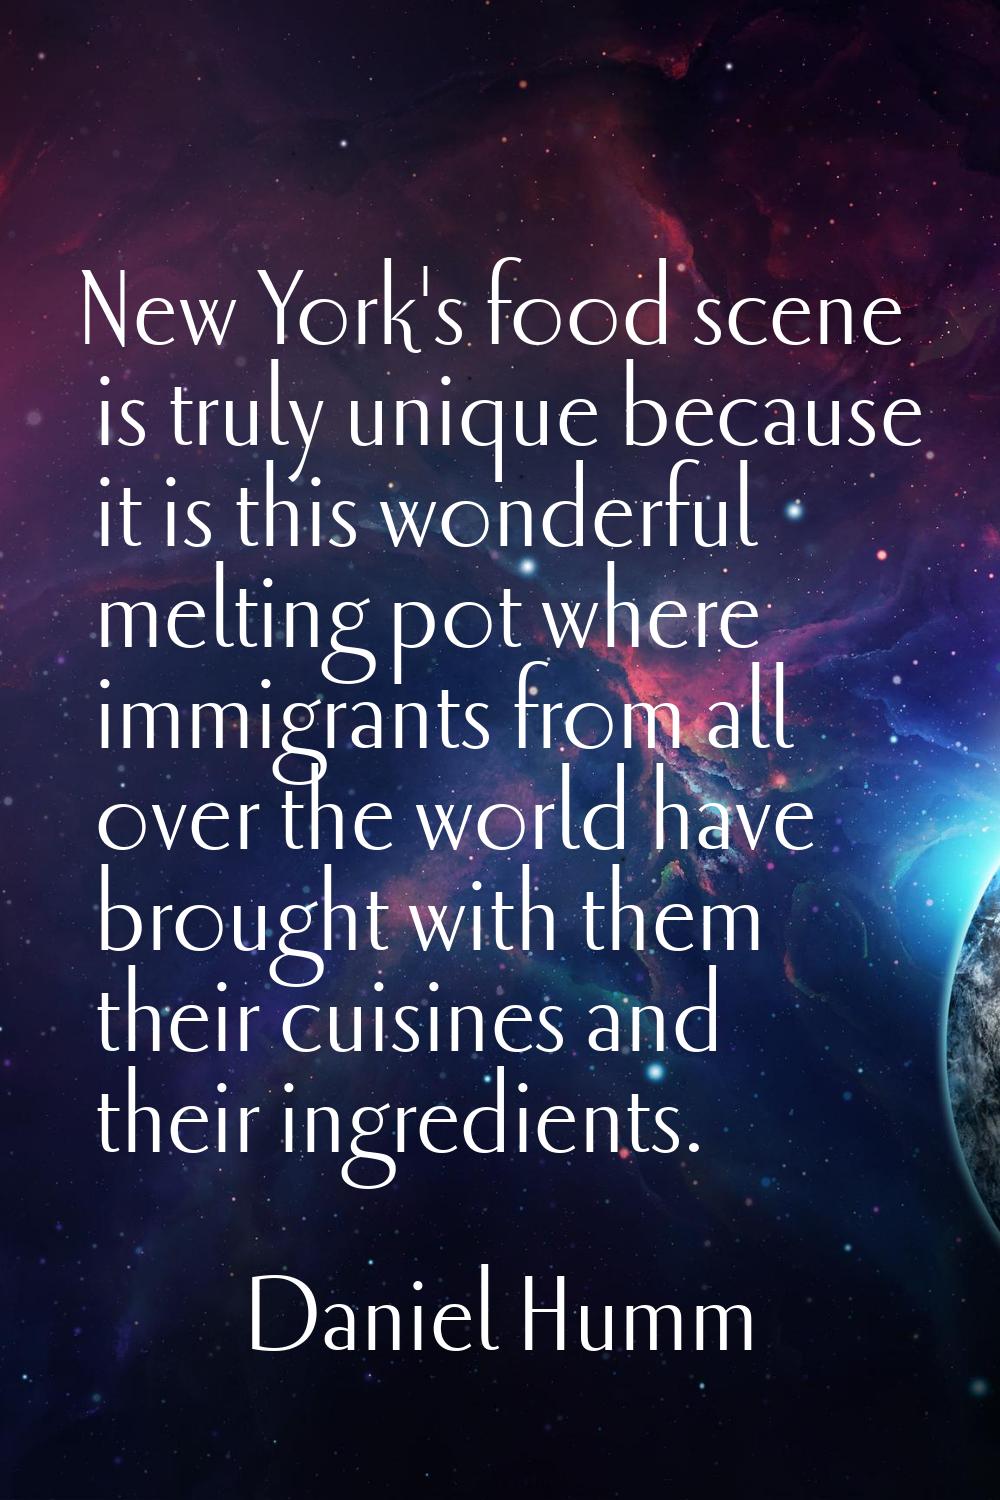 New York's food scene is truly unique because it is this wonderful melting pot where immigrants fro